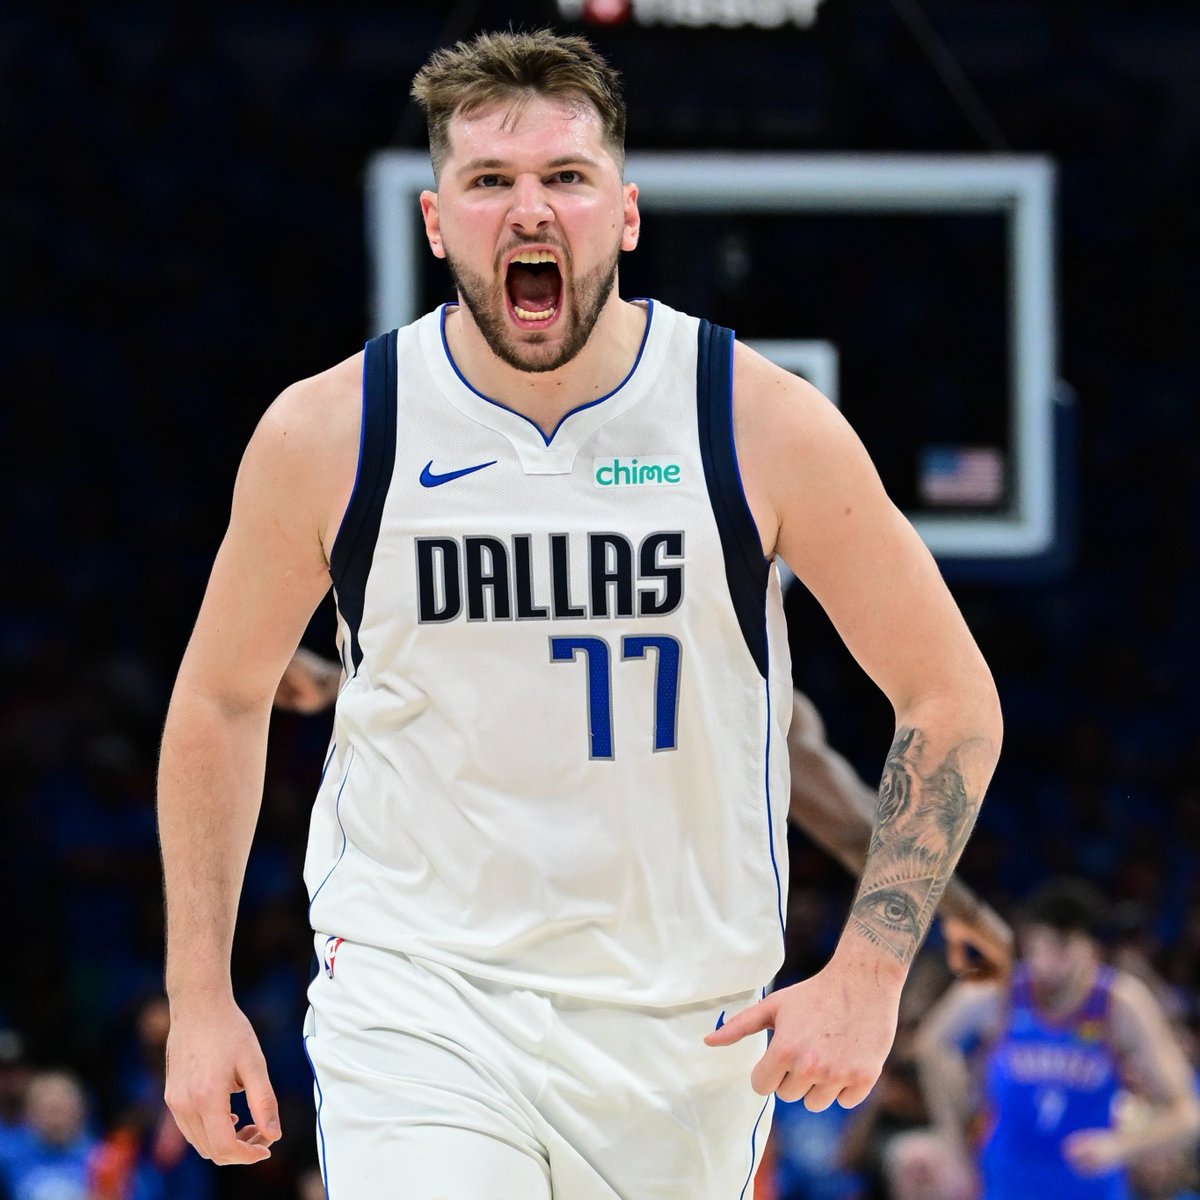 P.J Washington dropped playoff career-high 29 points while Luka Doncic added 29 of his own, and the Dallas Mavericks prevailed over the OKC Thunder, 119-110, to tie their West semifinal series at one-game apiece.  

#EverythingCounts #EveryonesGame #NBAPlayoffs

📸 @dallasmavs